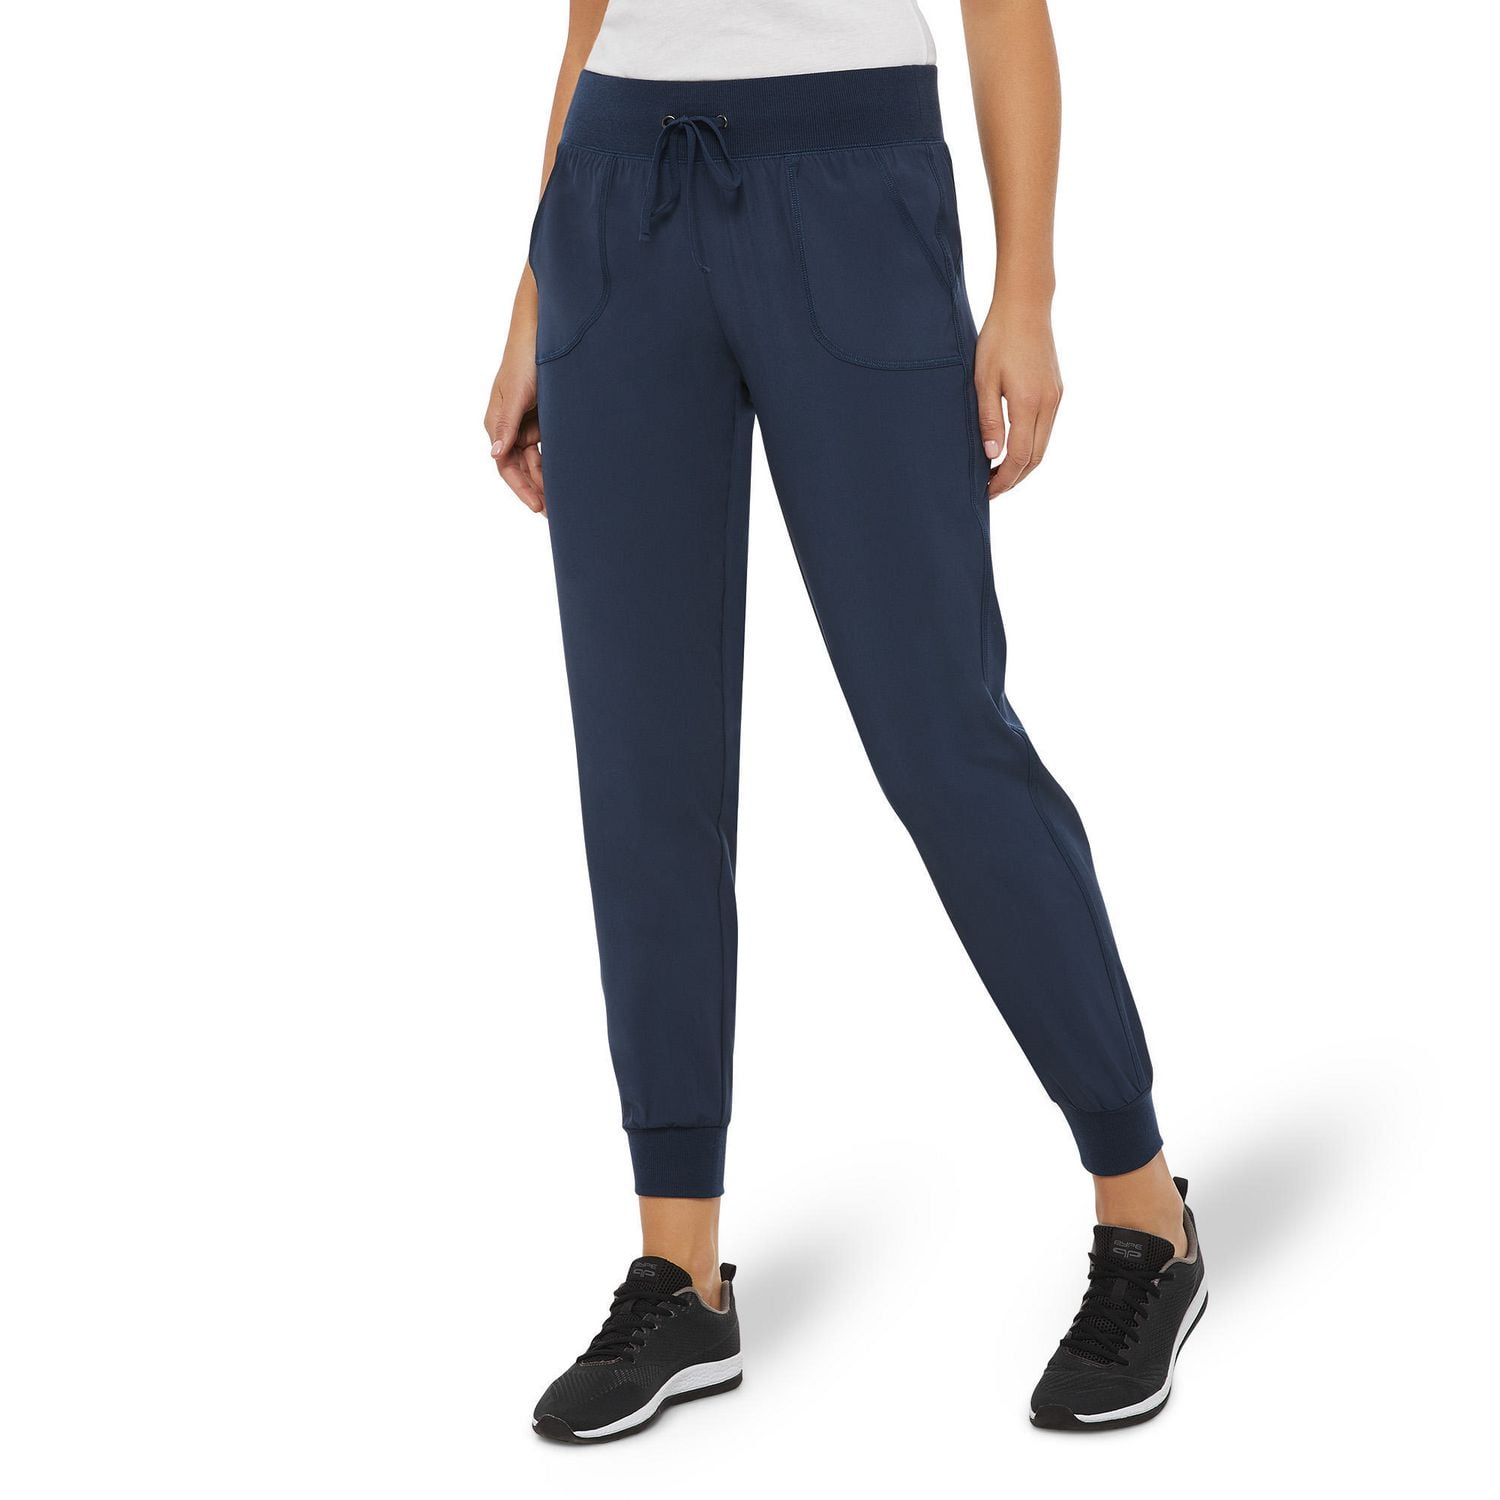 Athletic Works Women's Athleisure Soft Jogger Pants, Blue, XXL at   Women's Clothing store